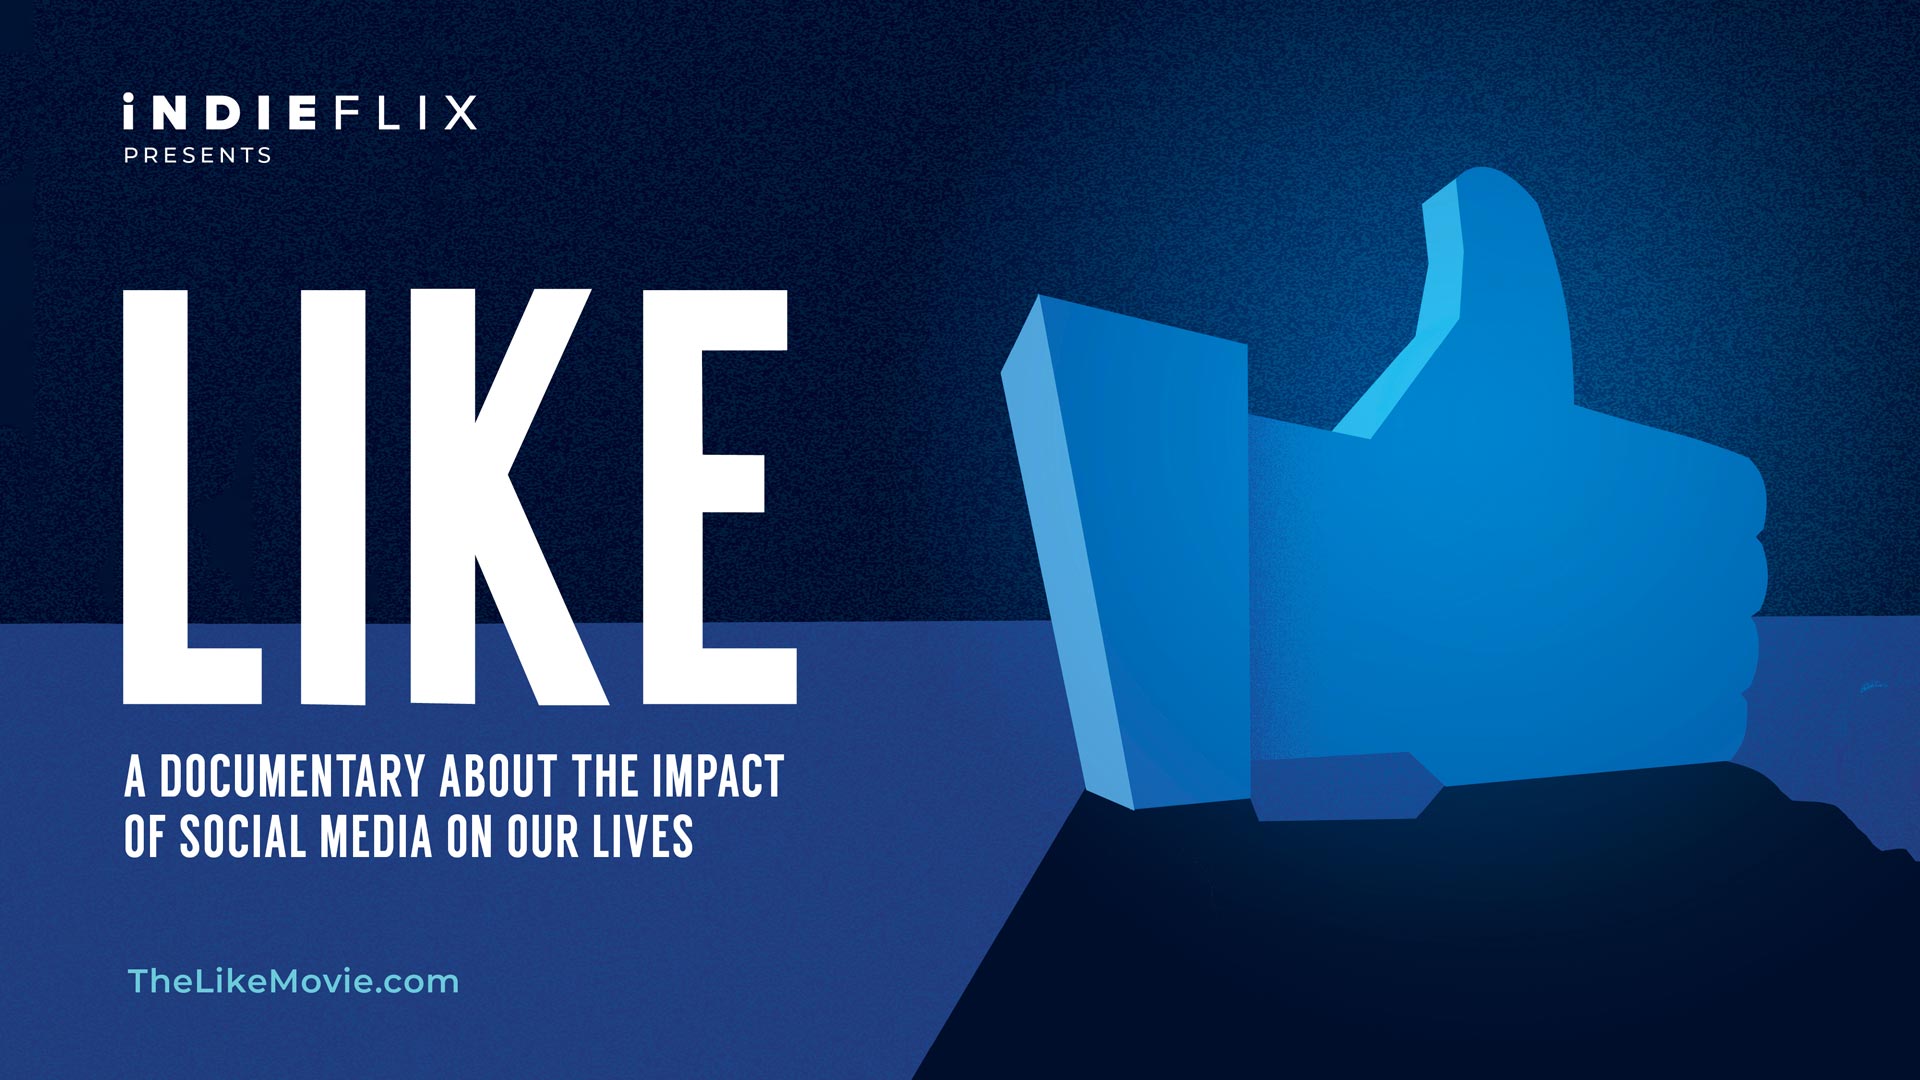 "Indieflix presents LIKE, a documentary about the impact of social media on our lives, thelikemovie.com. This is next to a large like button symbol.